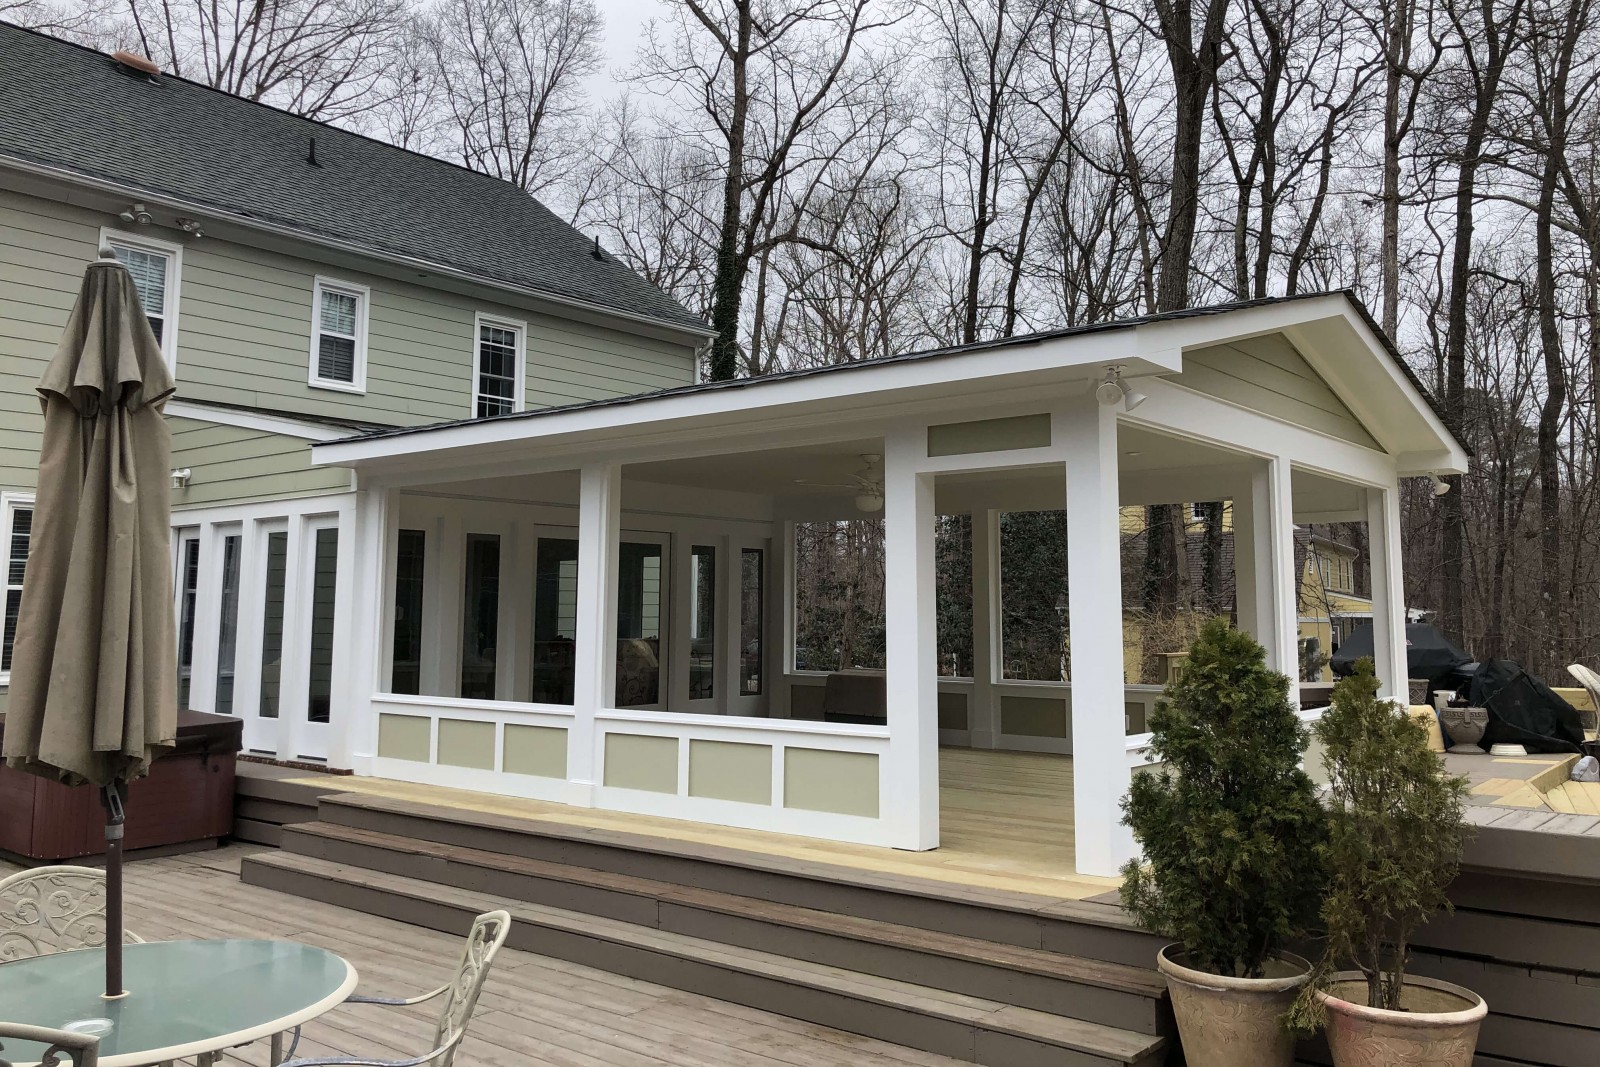 Covered porch and outdoor deck